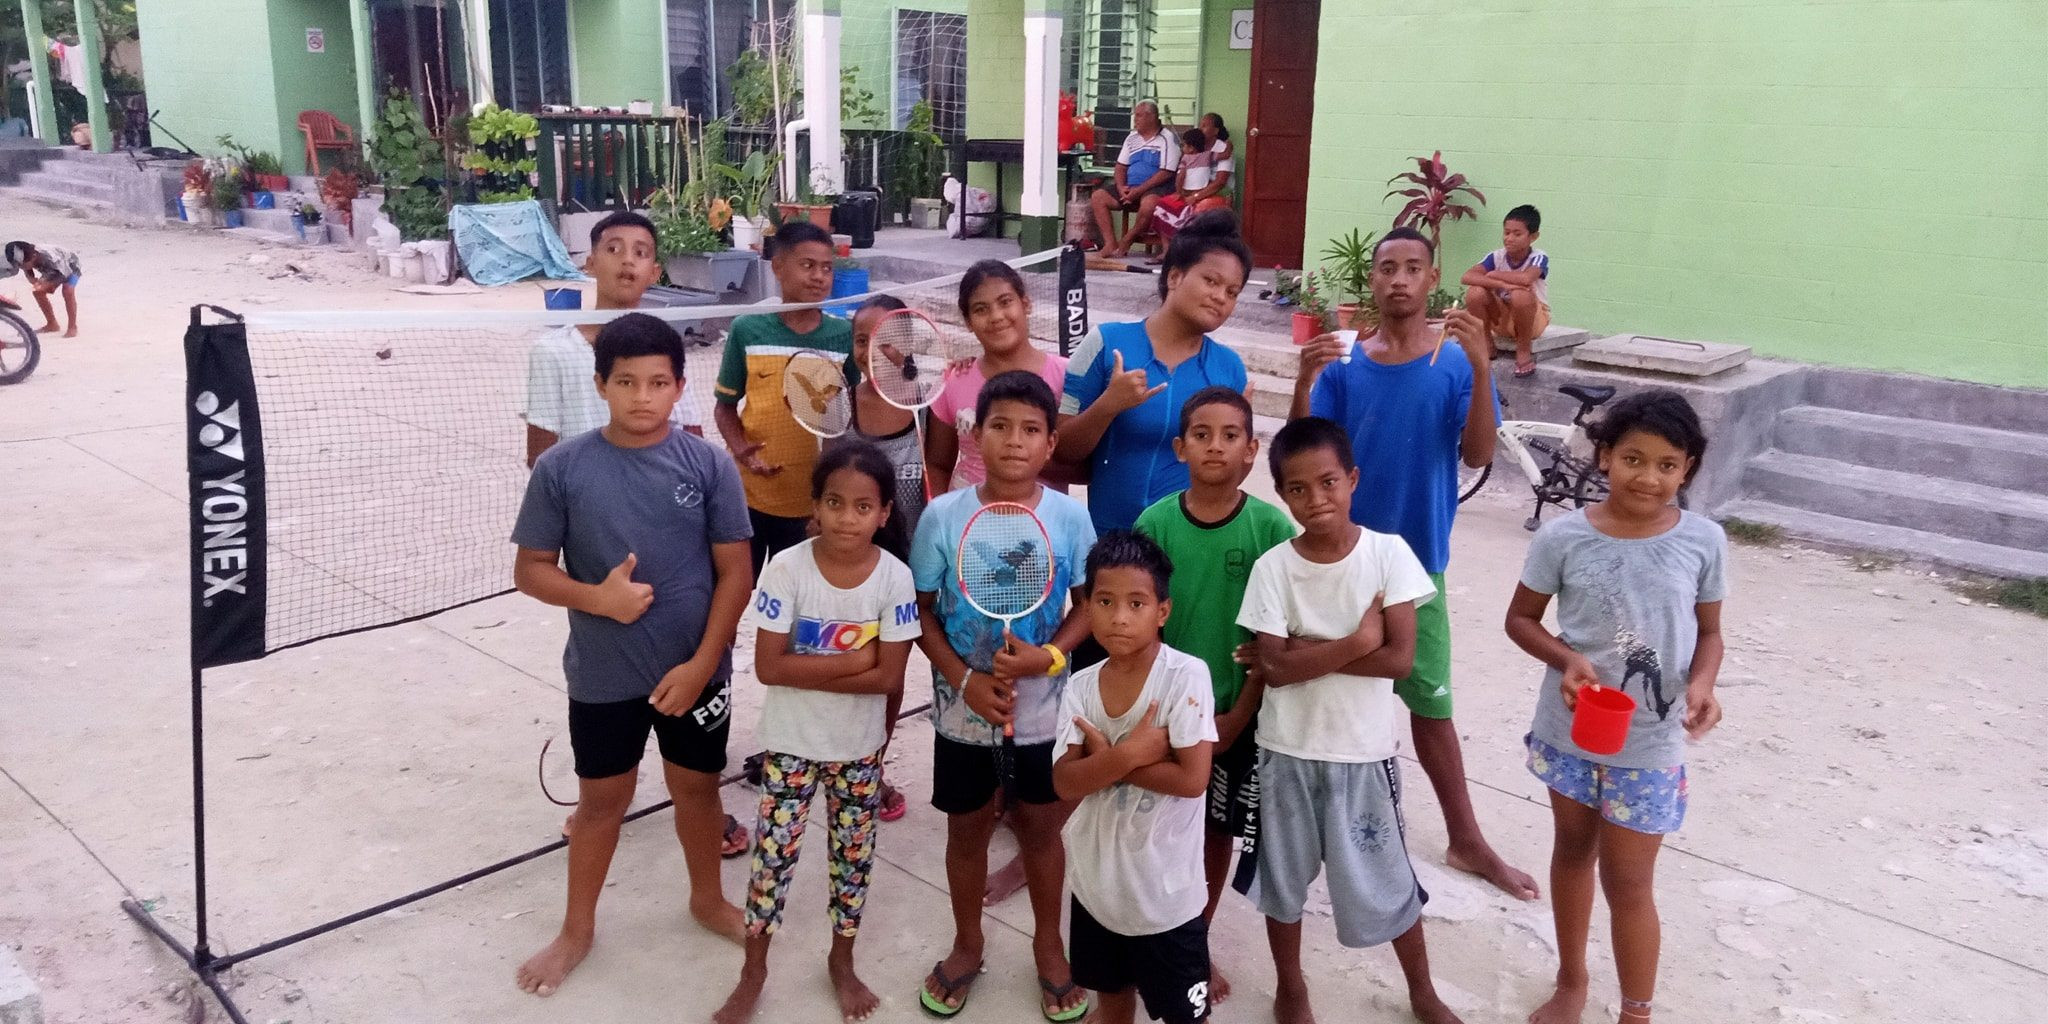 Tuvalu Badminton has been running Shuttle Time for the youth ©Tuvalu Badminton